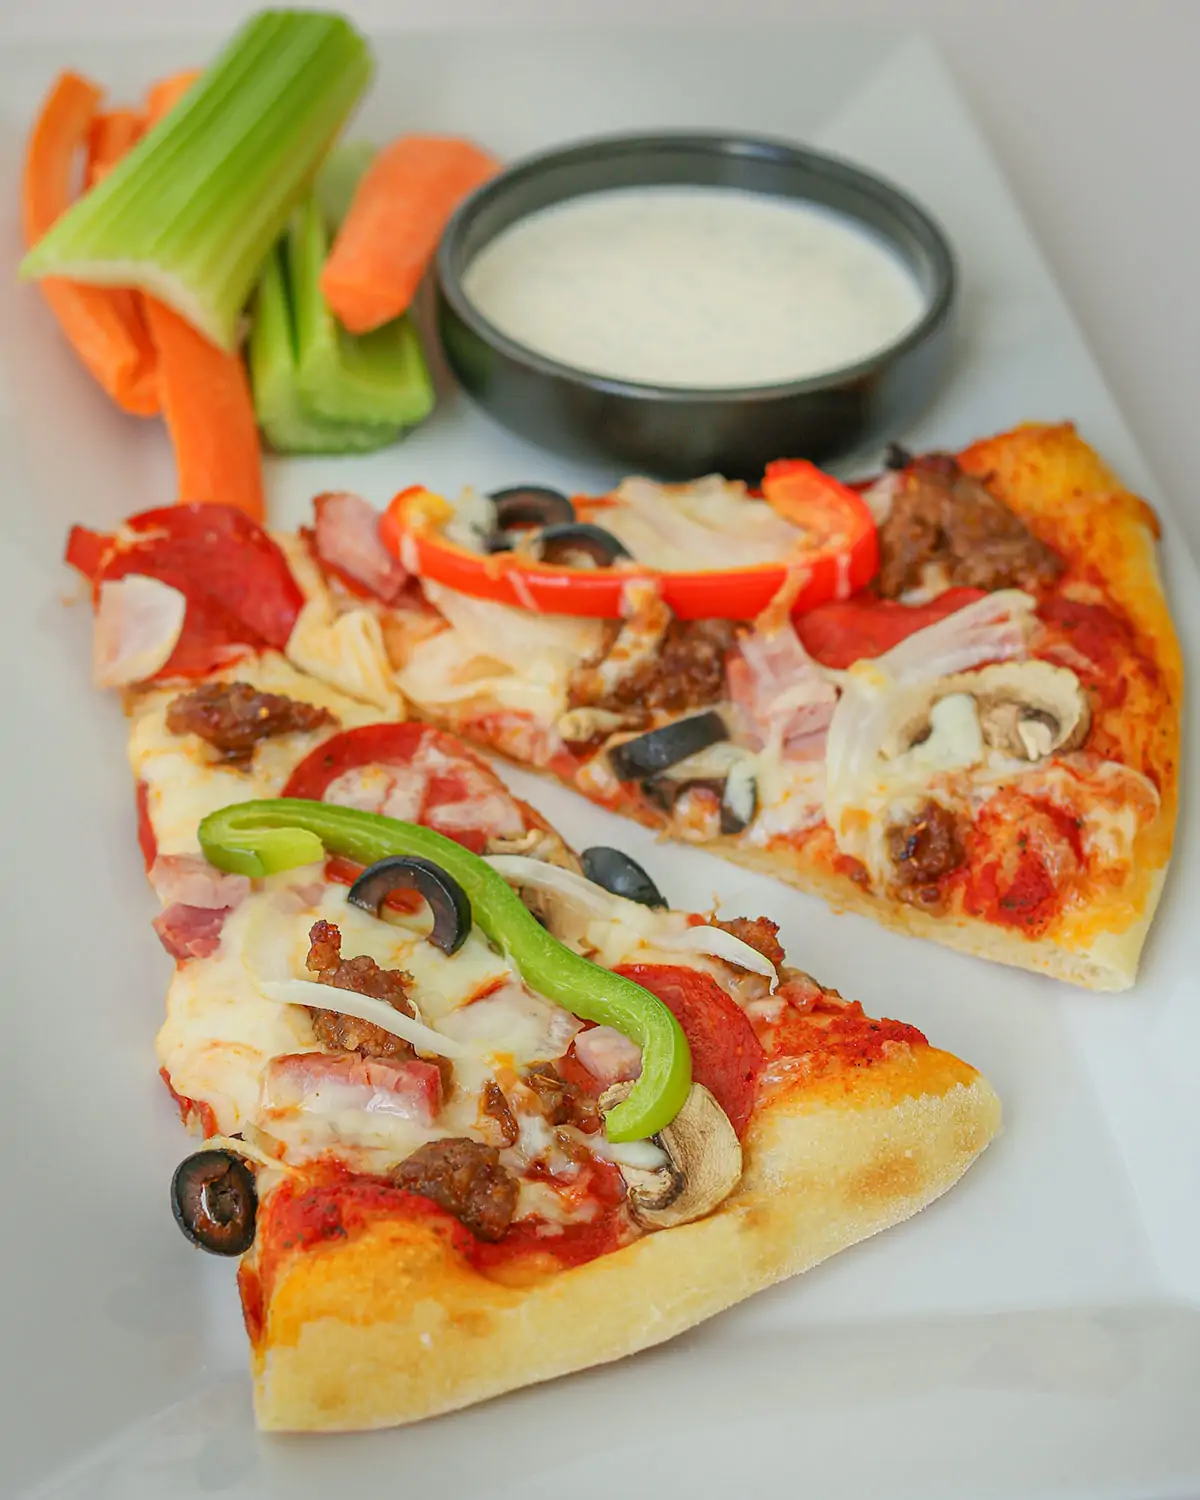 Create a world full of hot & fresh pizza! We not only serve the